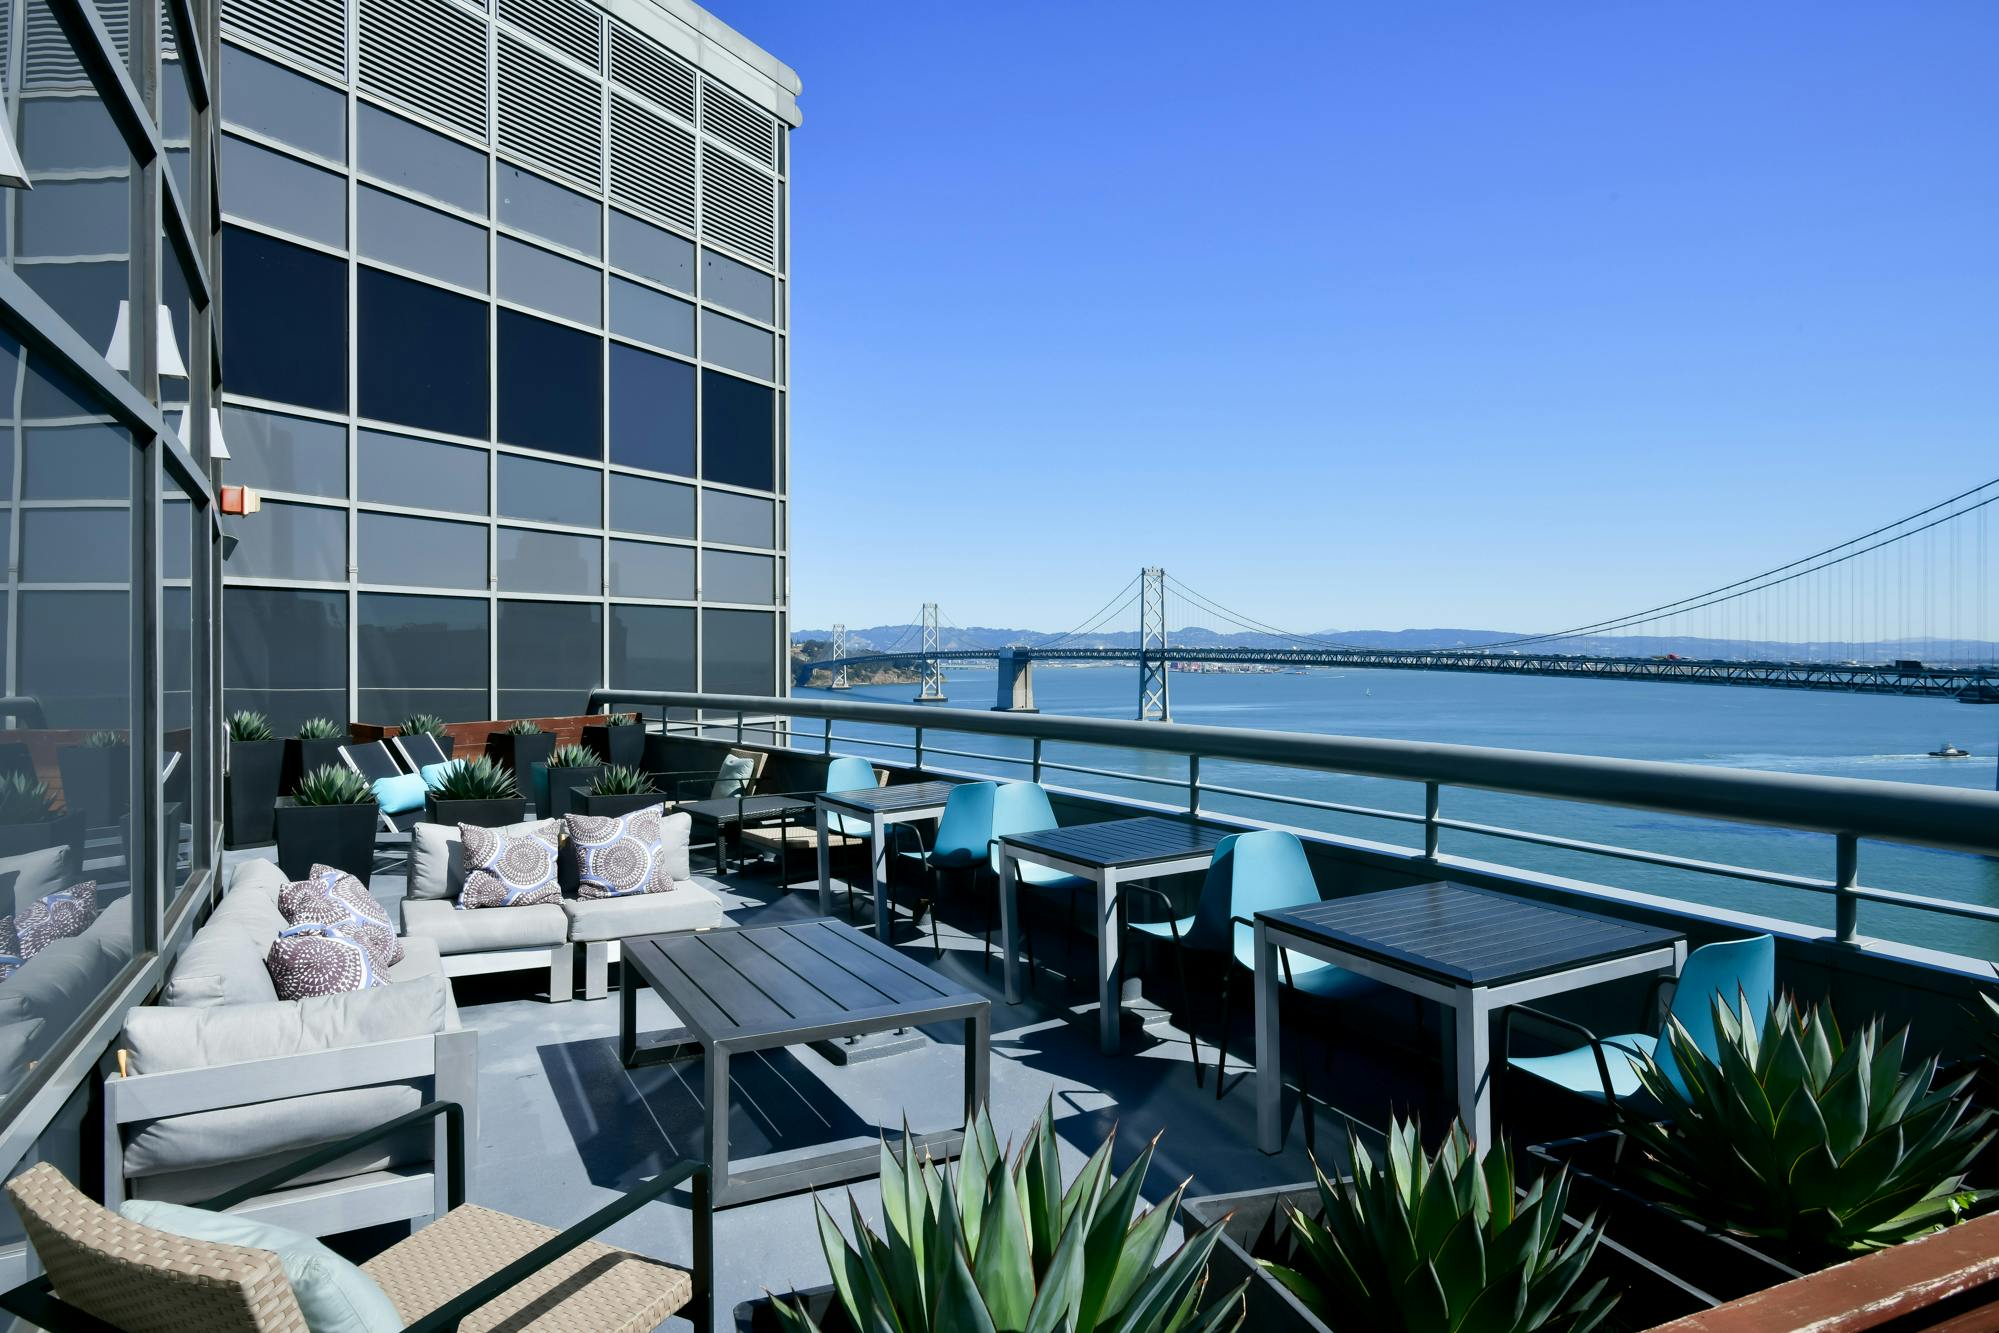 With gorgeous views of the bay, bay bridge, and city, The Towers at Rincon Apartments sit in South Beach and rise up 32 floors.